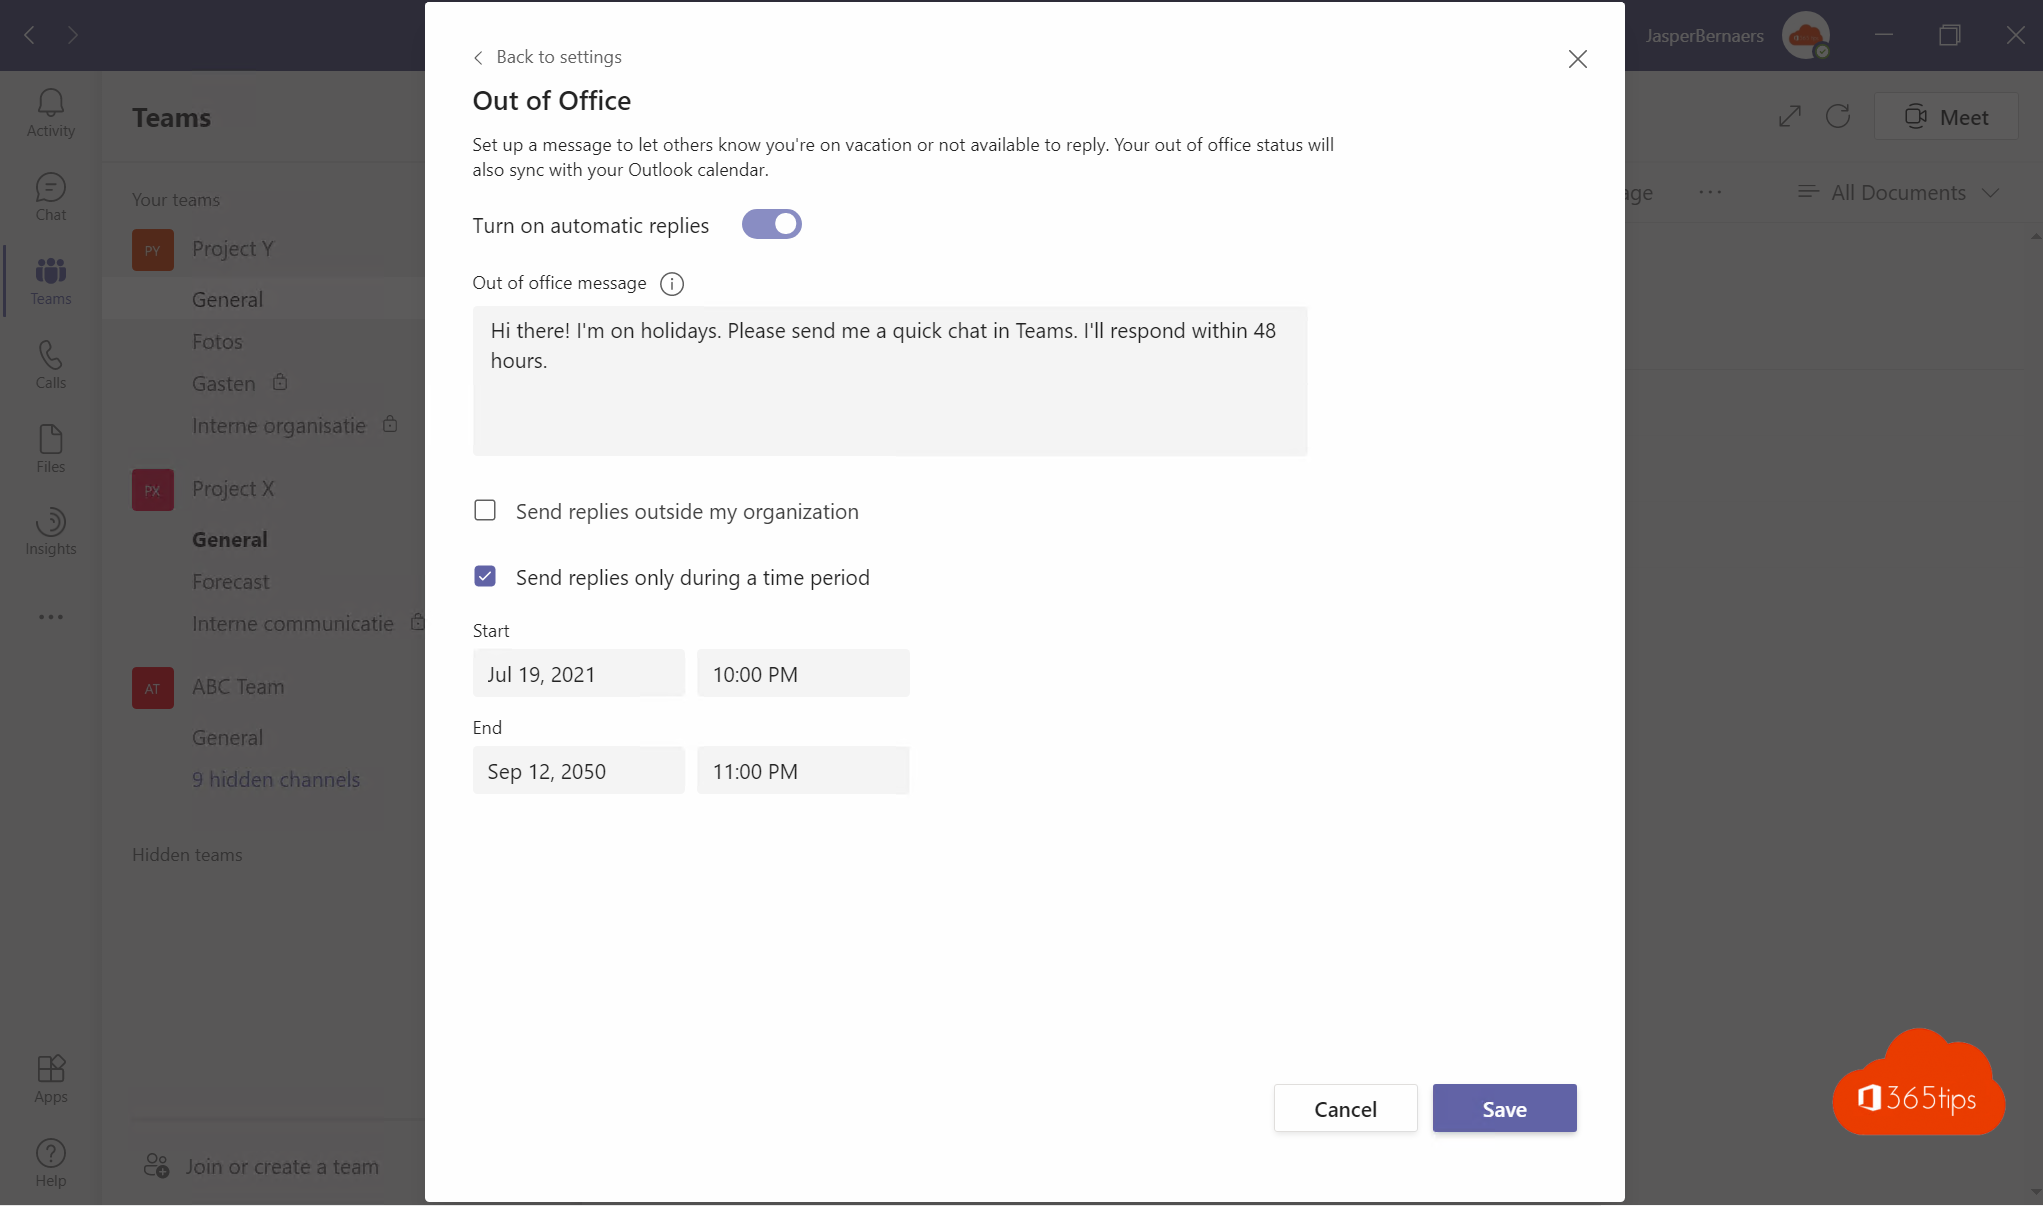 How to set an Out-Of-Office or status message in Microsoft Teams?